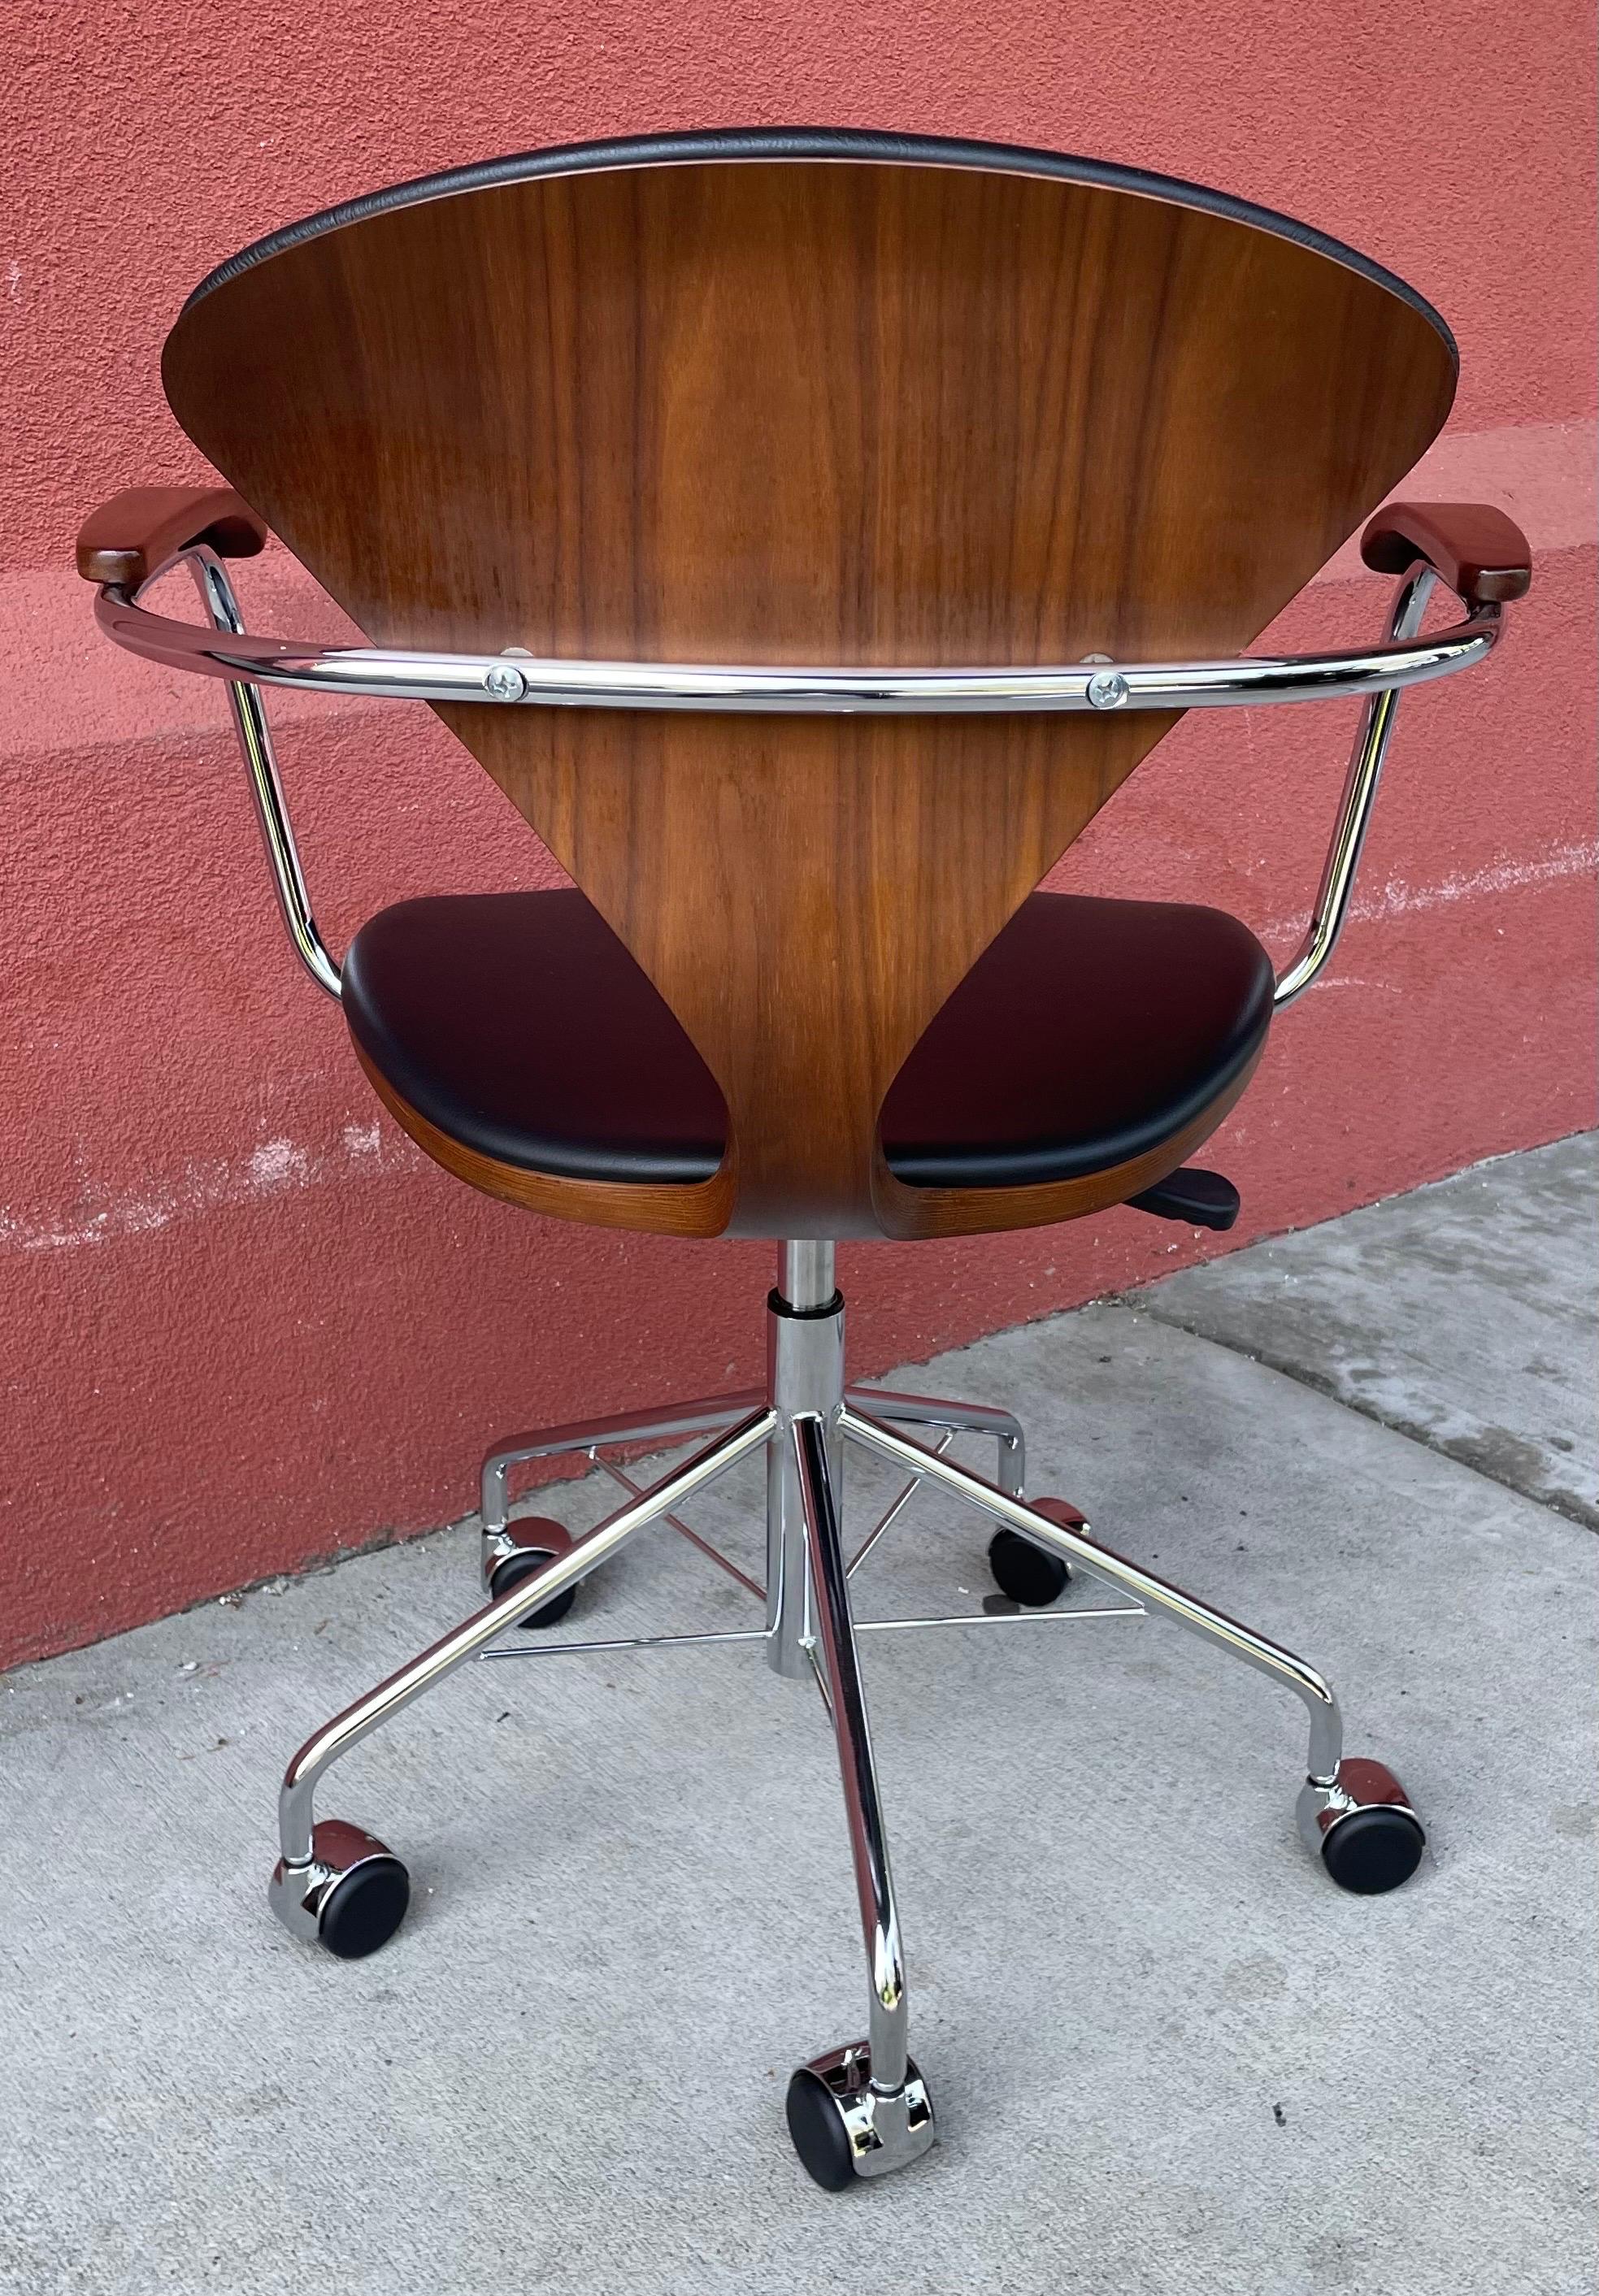 Mid-Century Modern Desk Chair by Norman Cherner in Walnut Chrome Base Black Leather Seat & Back